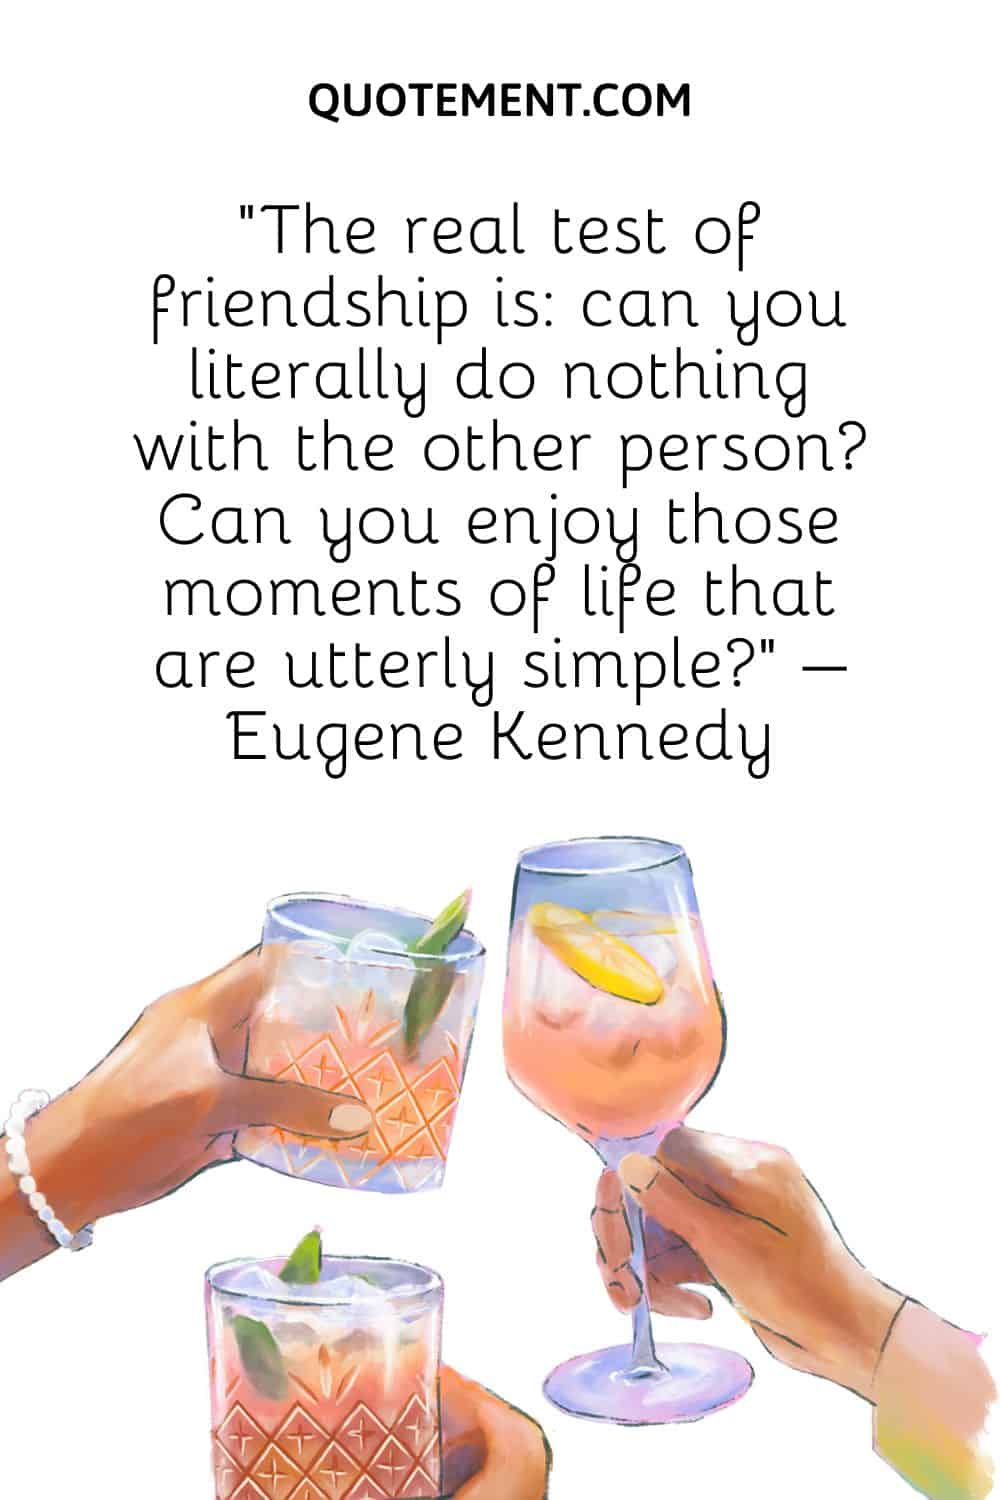 “The real test of friendship is can you literally do nothing with the other person Can you enjoy those moments of life that are utterly simple” – Eugene Kennedy